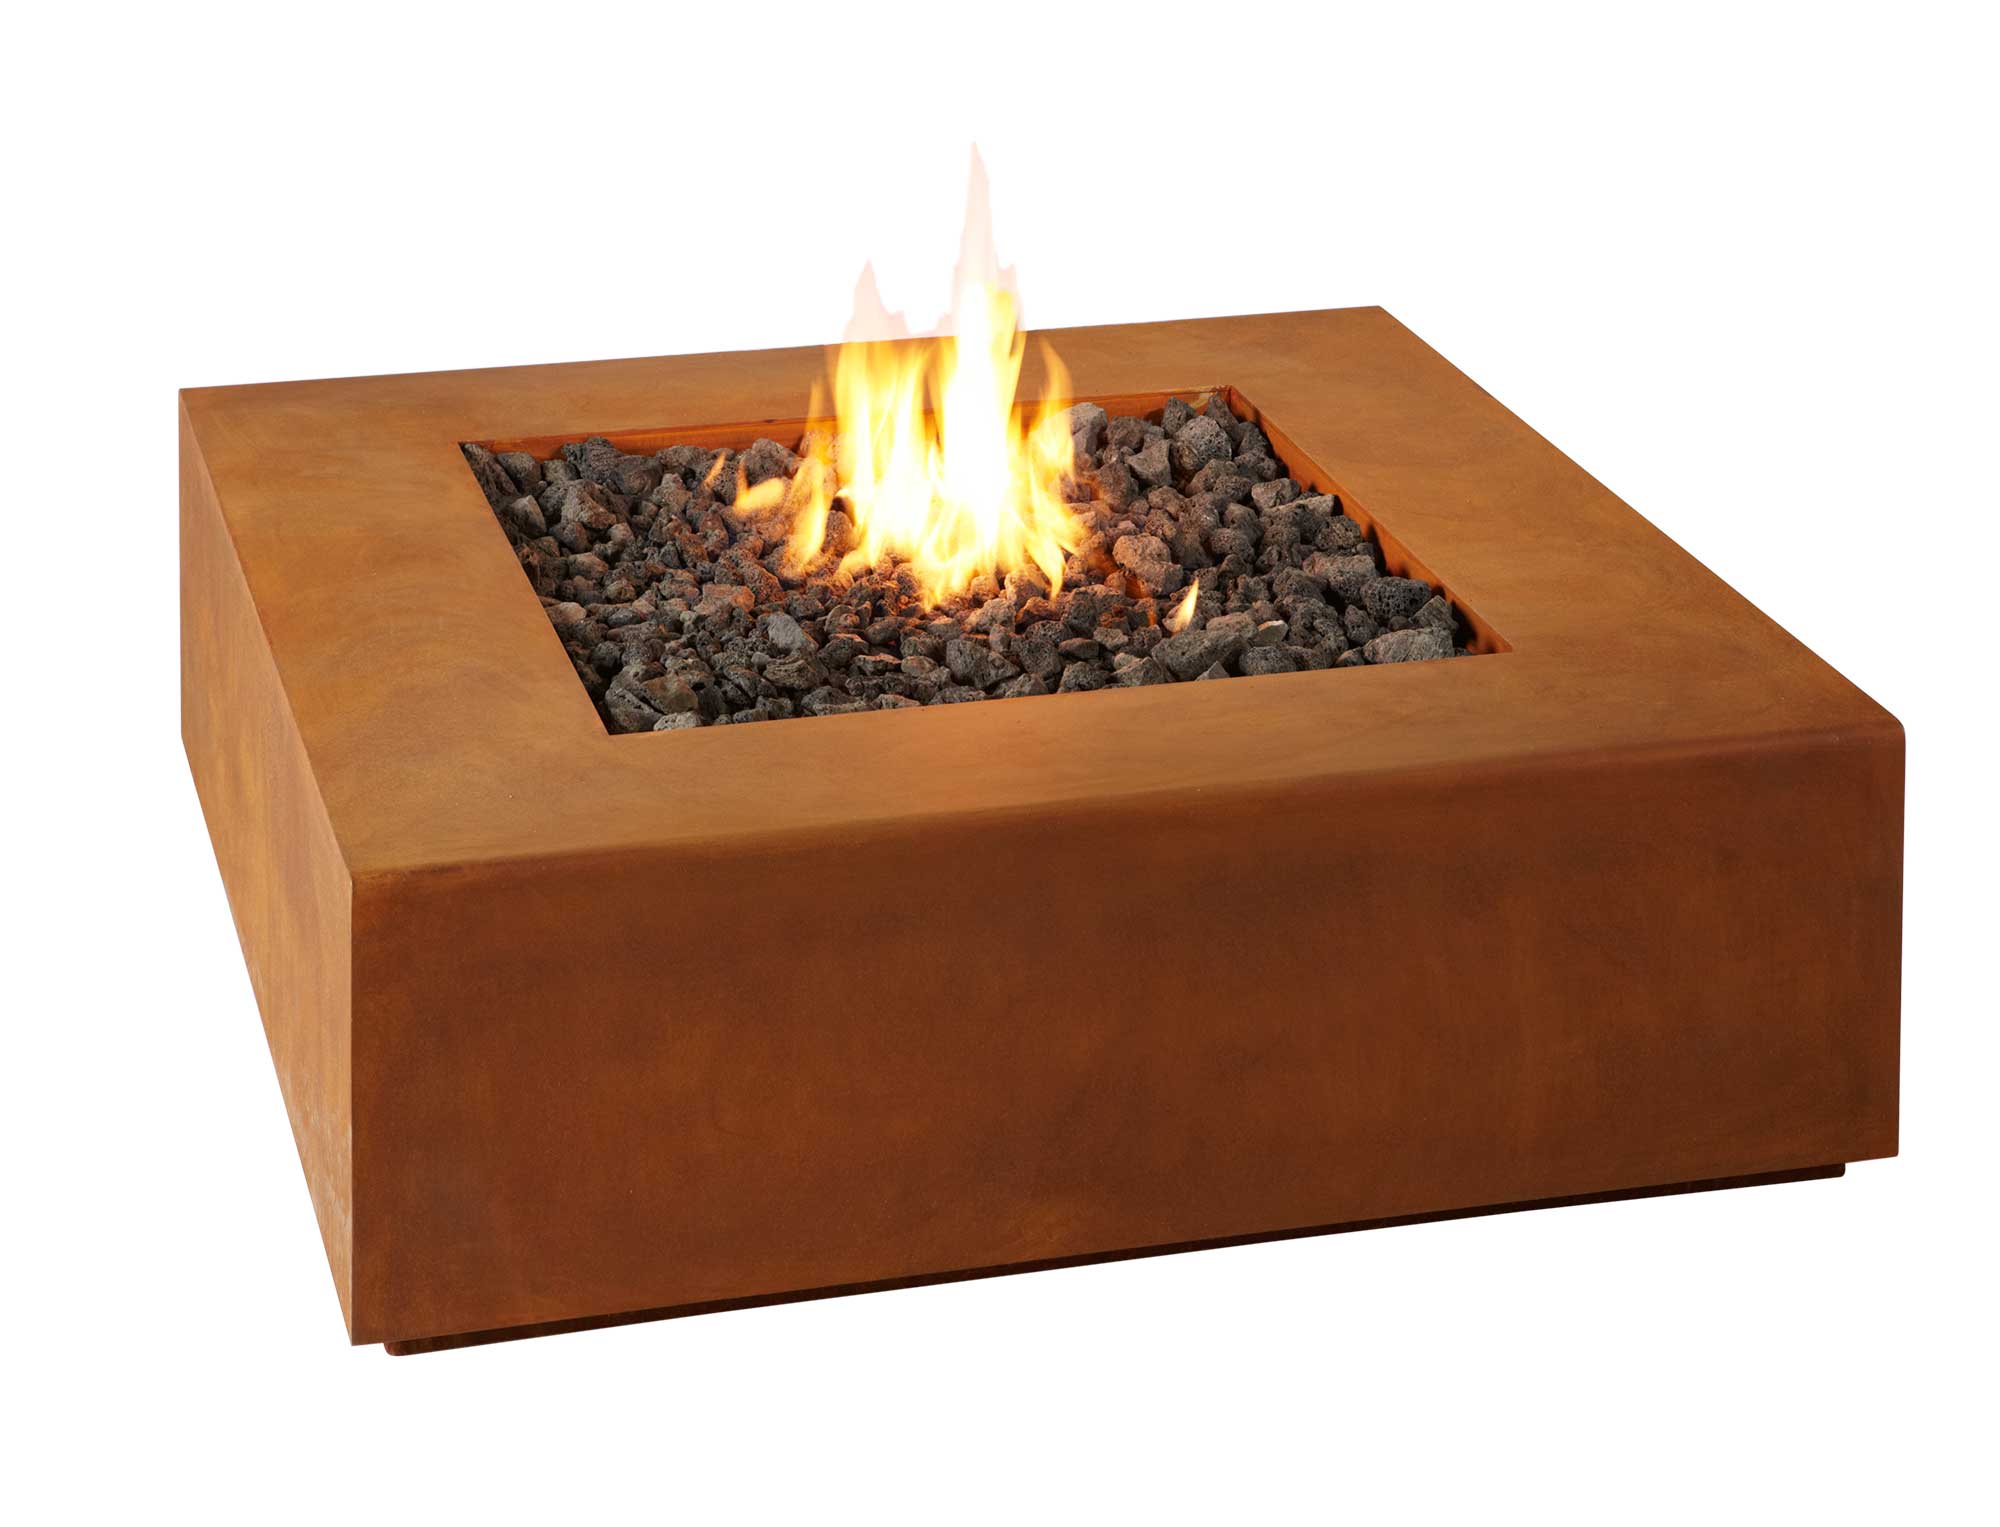 Fire Pit Kits are available i